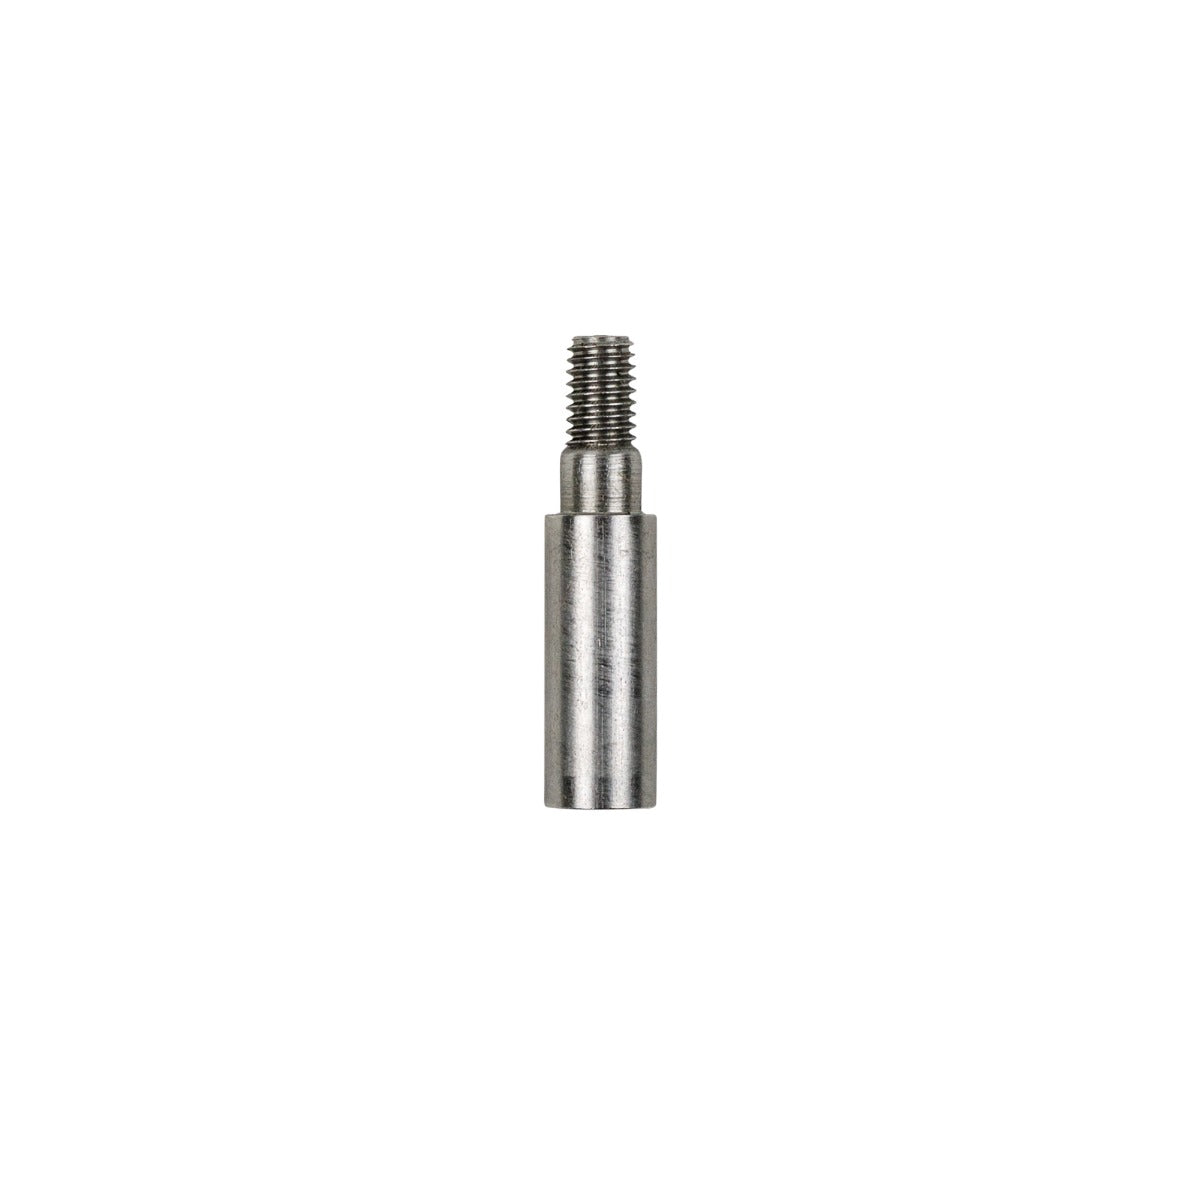 Thread Adapter (6mm Male to 5/16" Female)